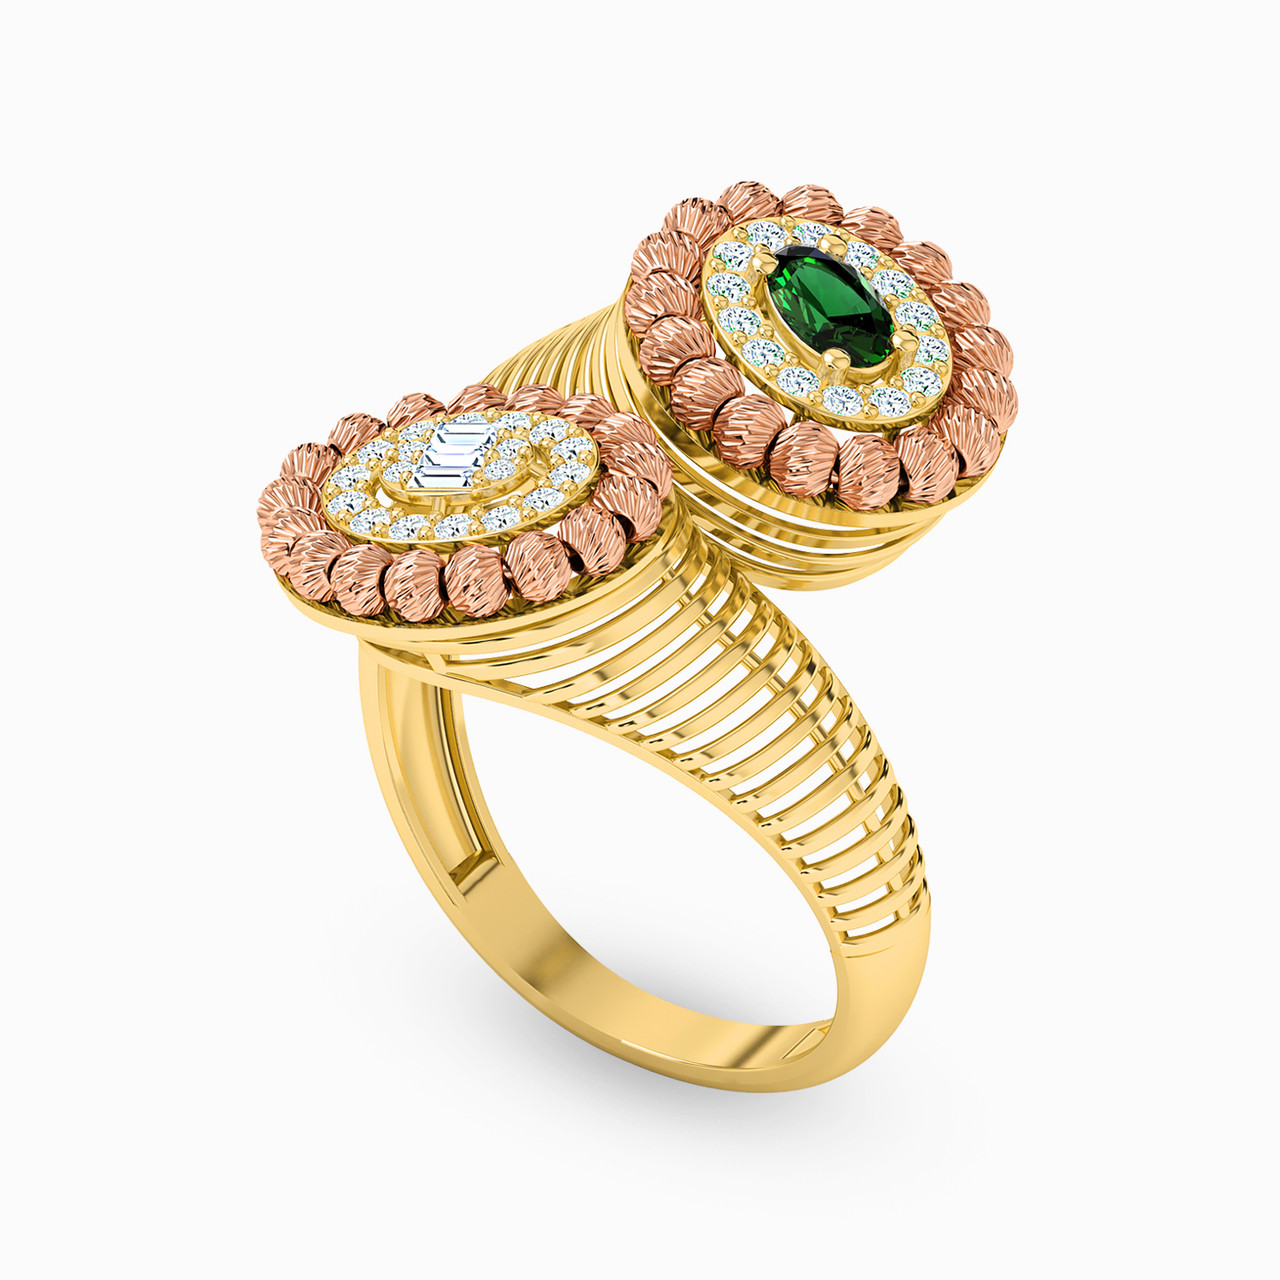 21K Gold Colored Stones Two-headed Ring